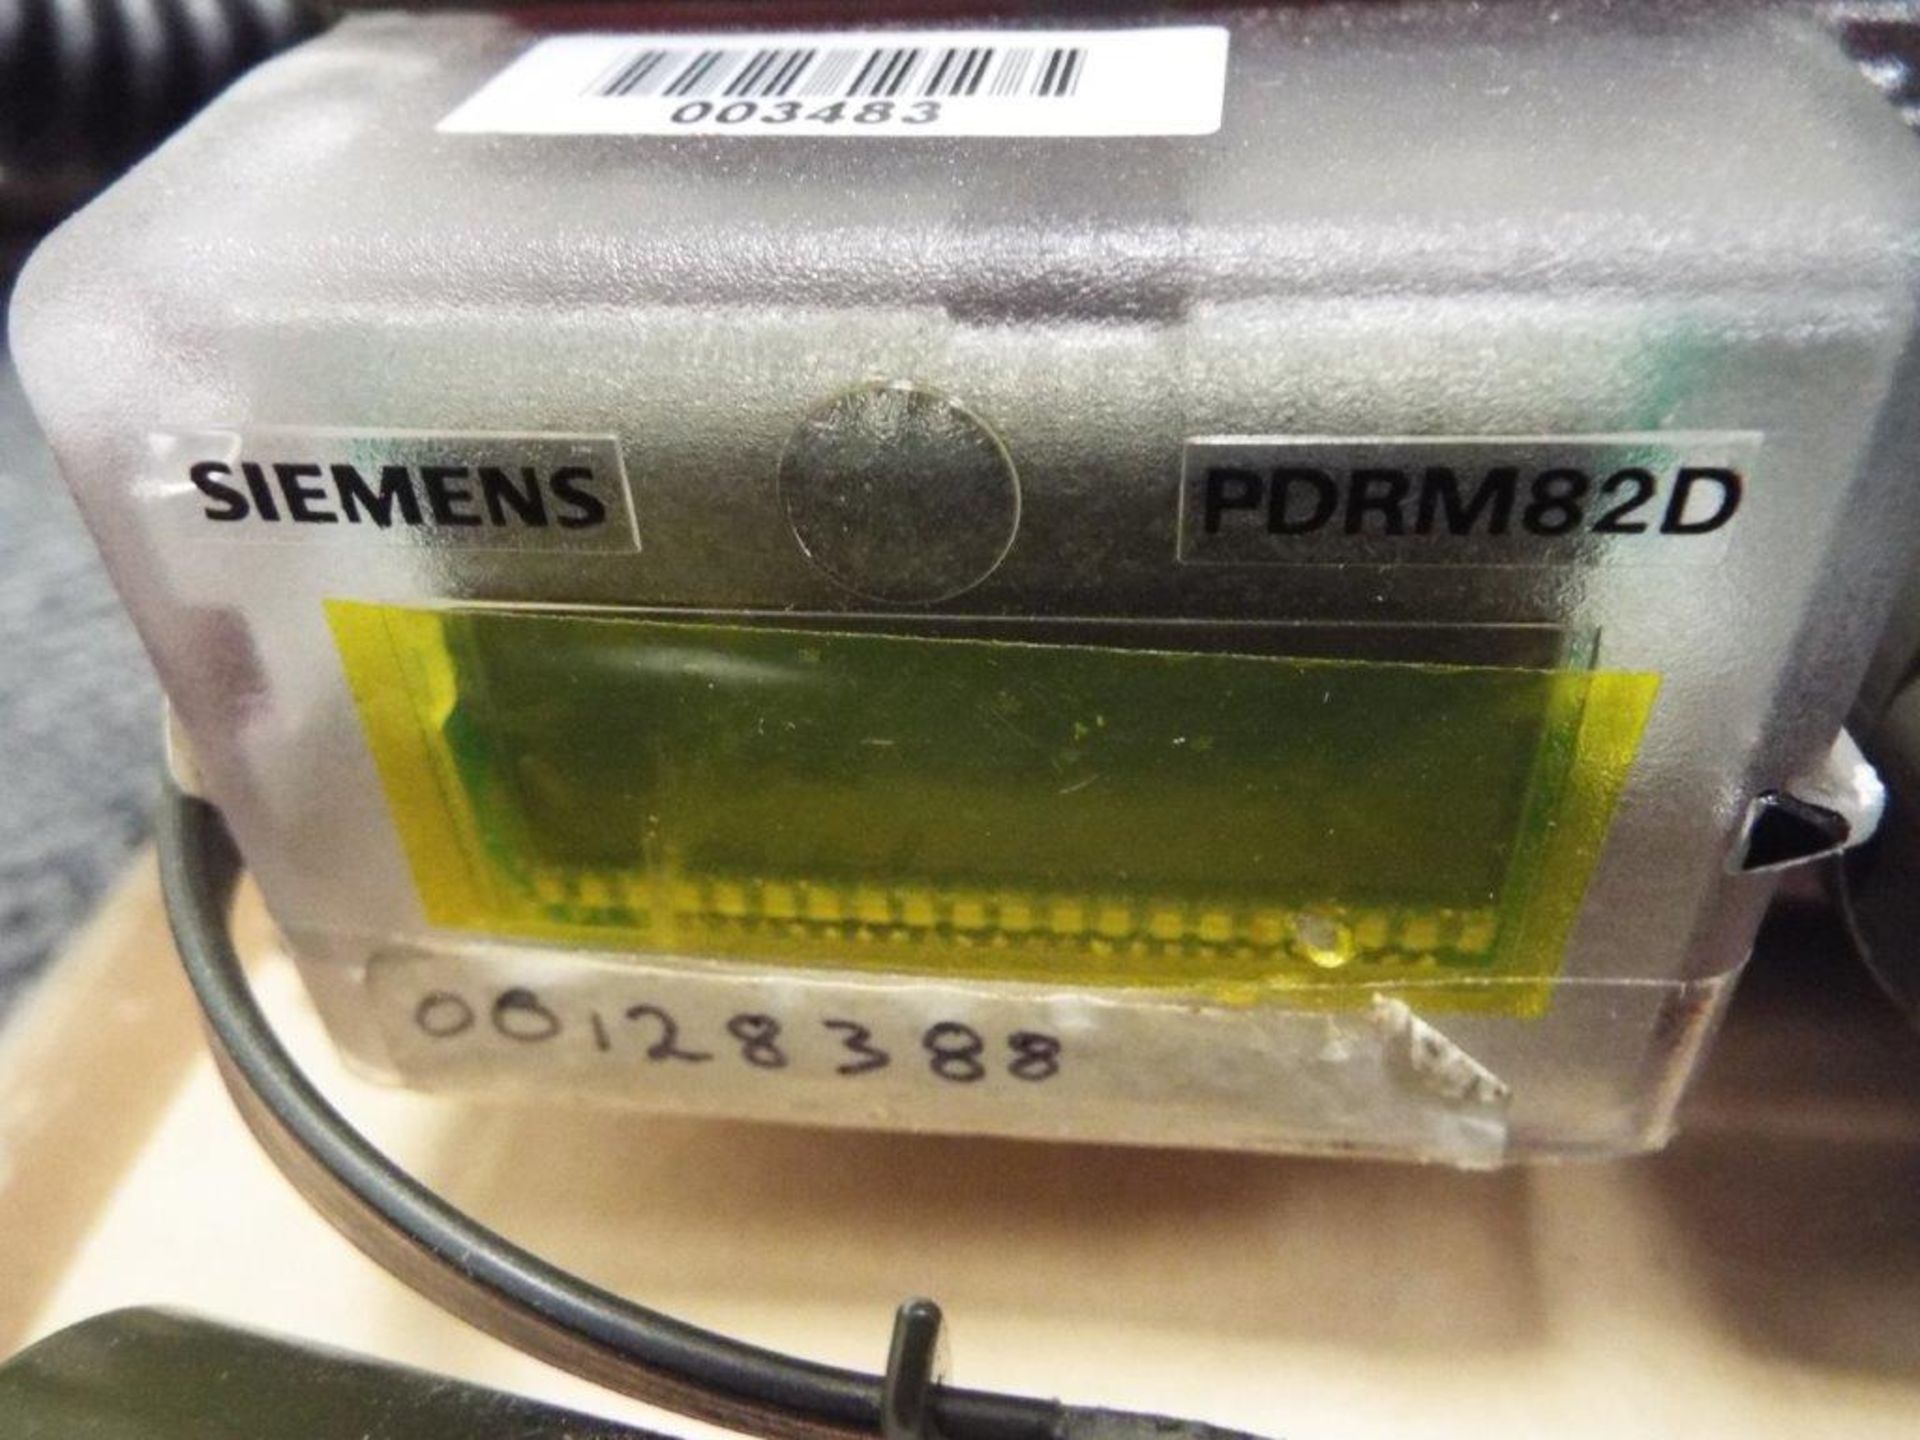 Siemens PDRM82D Portable Dose Rate Meter - Image 4 of 10